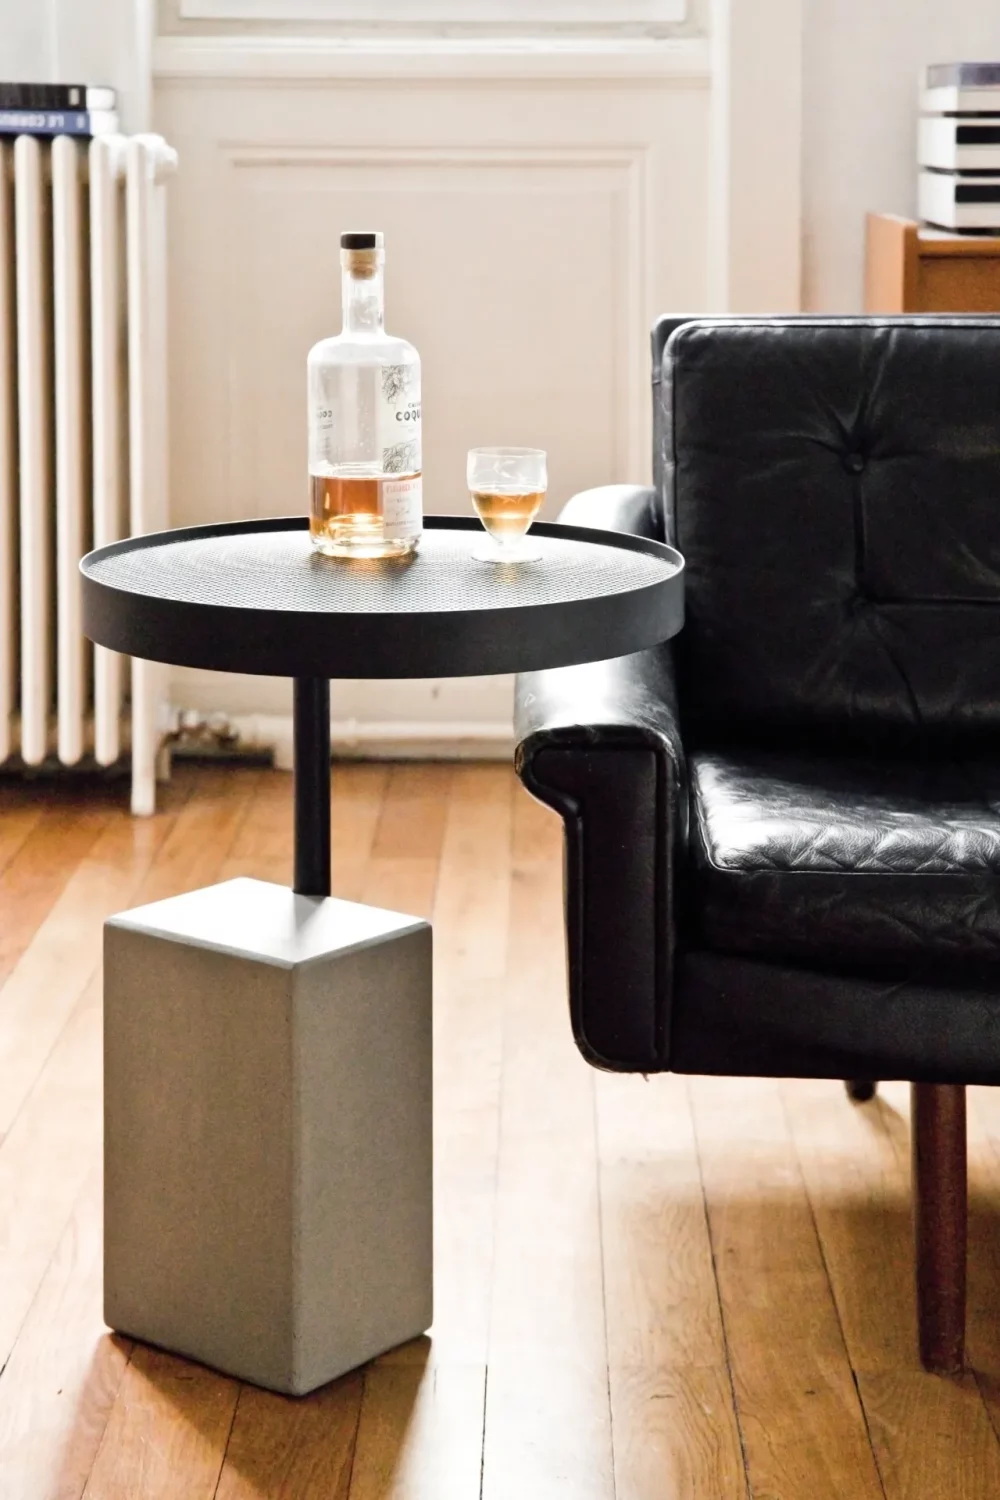 Aperitif time in a Scandinavian leather sofa and a glass of Calvados on the swivel top of the Twist side table